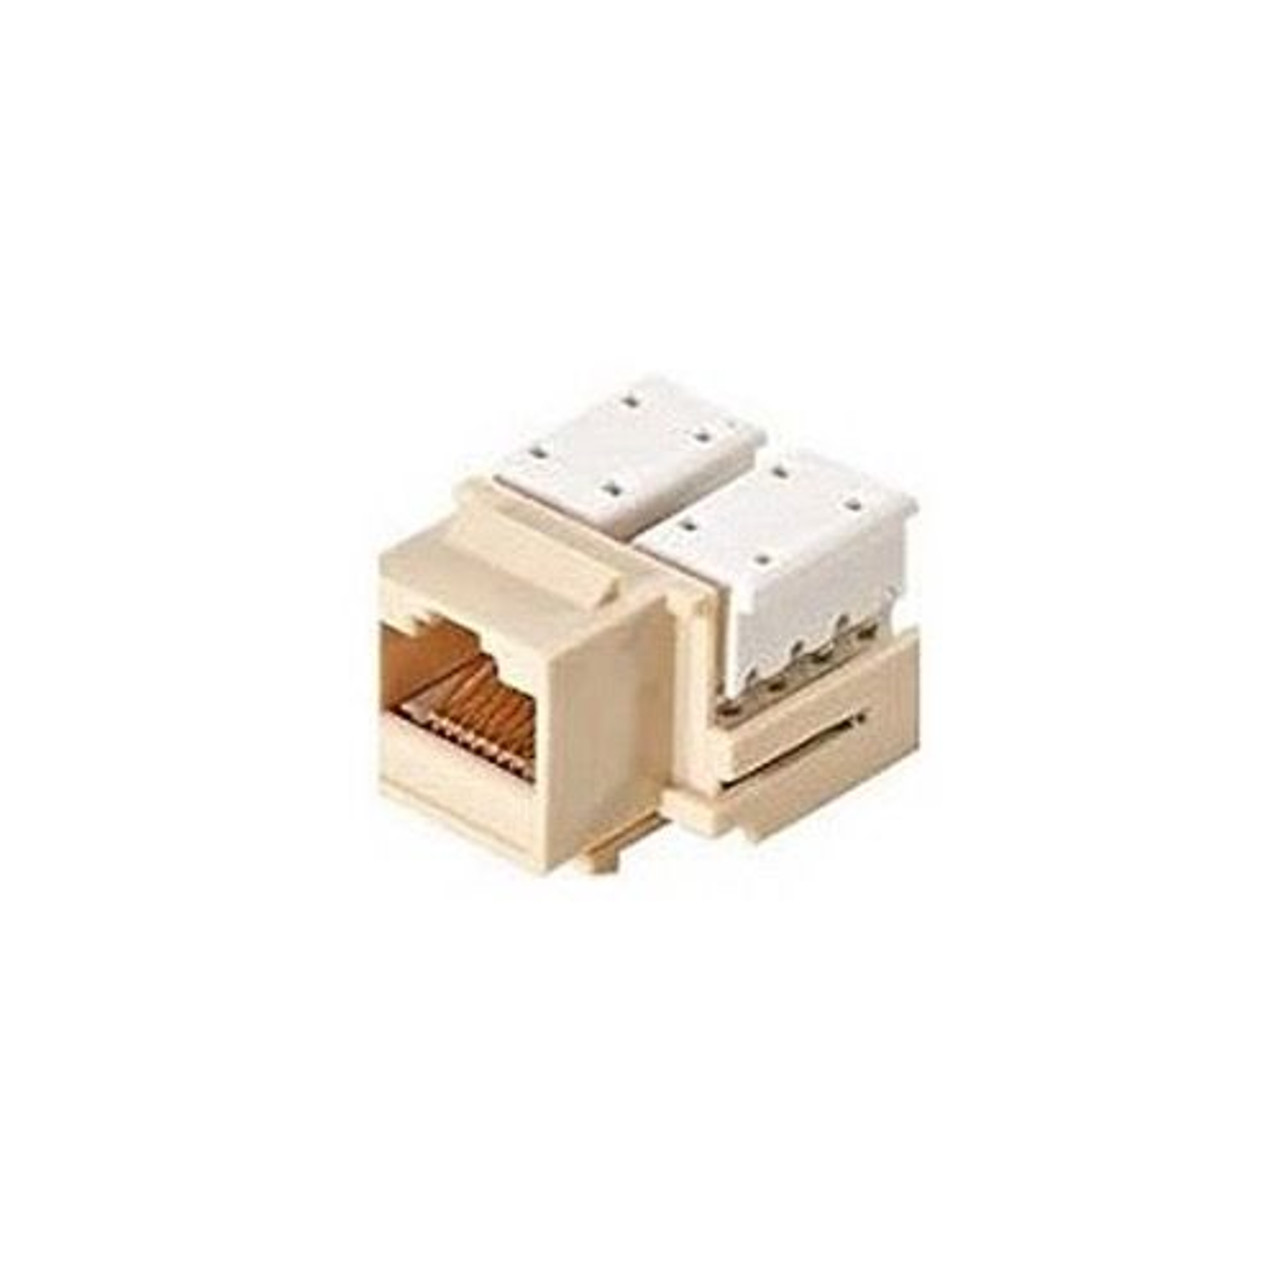 Eagle CAT5e Keystone Jack Insert RJ45 Almond 90 Degree Ethernet Connector 110-IDC Modular CAT 5e Network 8P8C 8 Wire Twisted Pair QuickPort Telephone Wall Plate Snap-In Insert Data Telecom